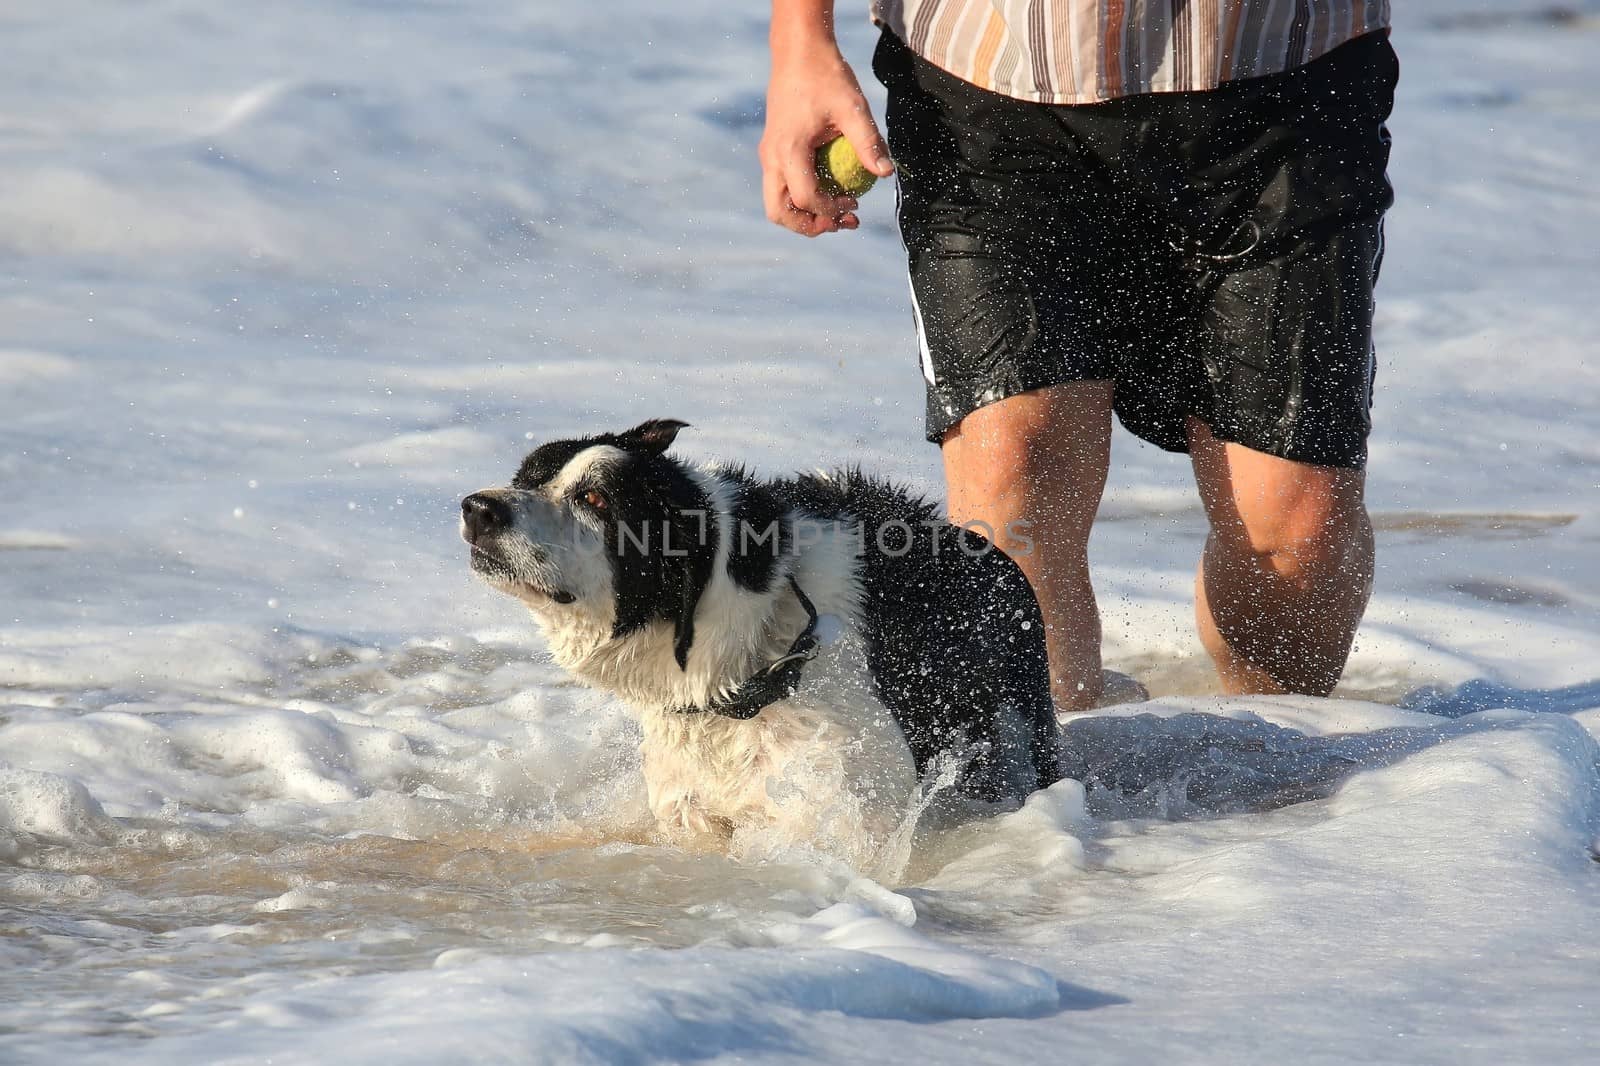 Pet dog playing in the sea water at the beach